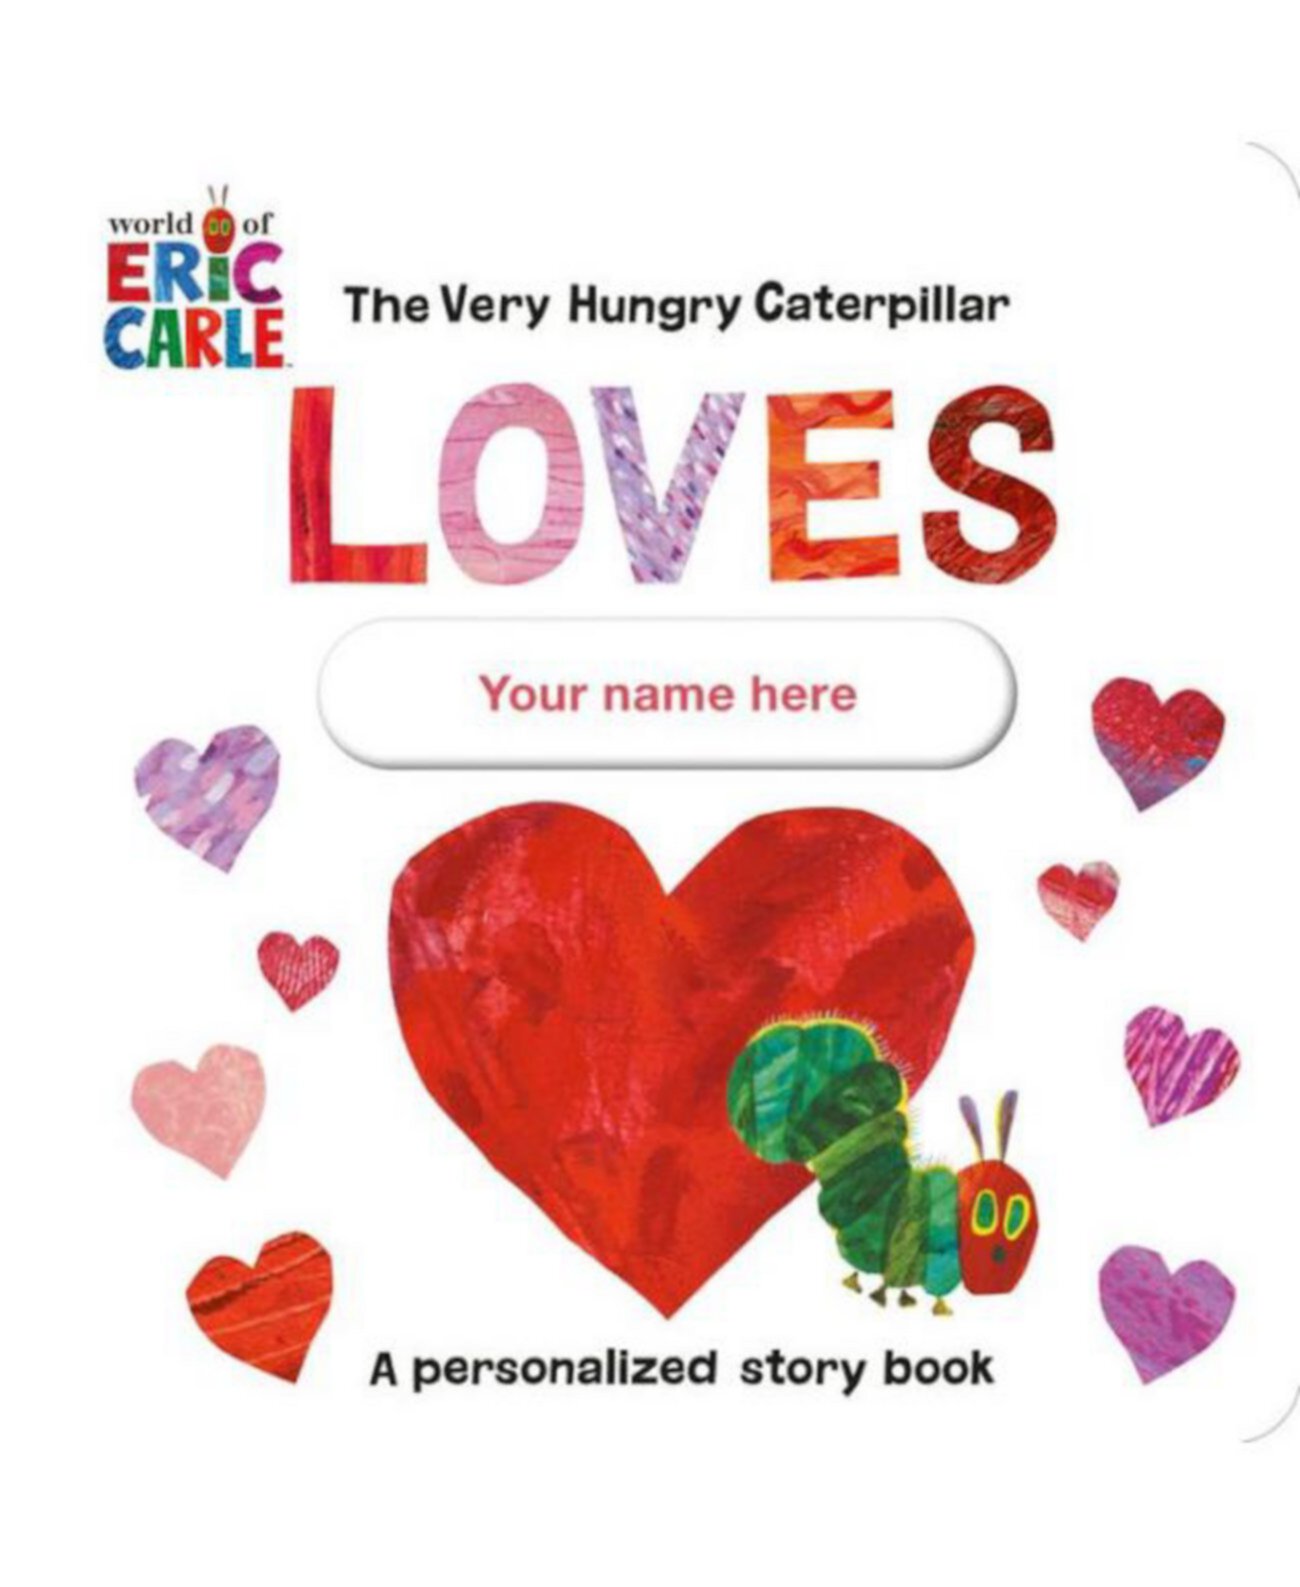 The Very Hungry Caterpillar Loves Your Name Here - A Personalized Story Book by Eric Carle Barnes & Noble